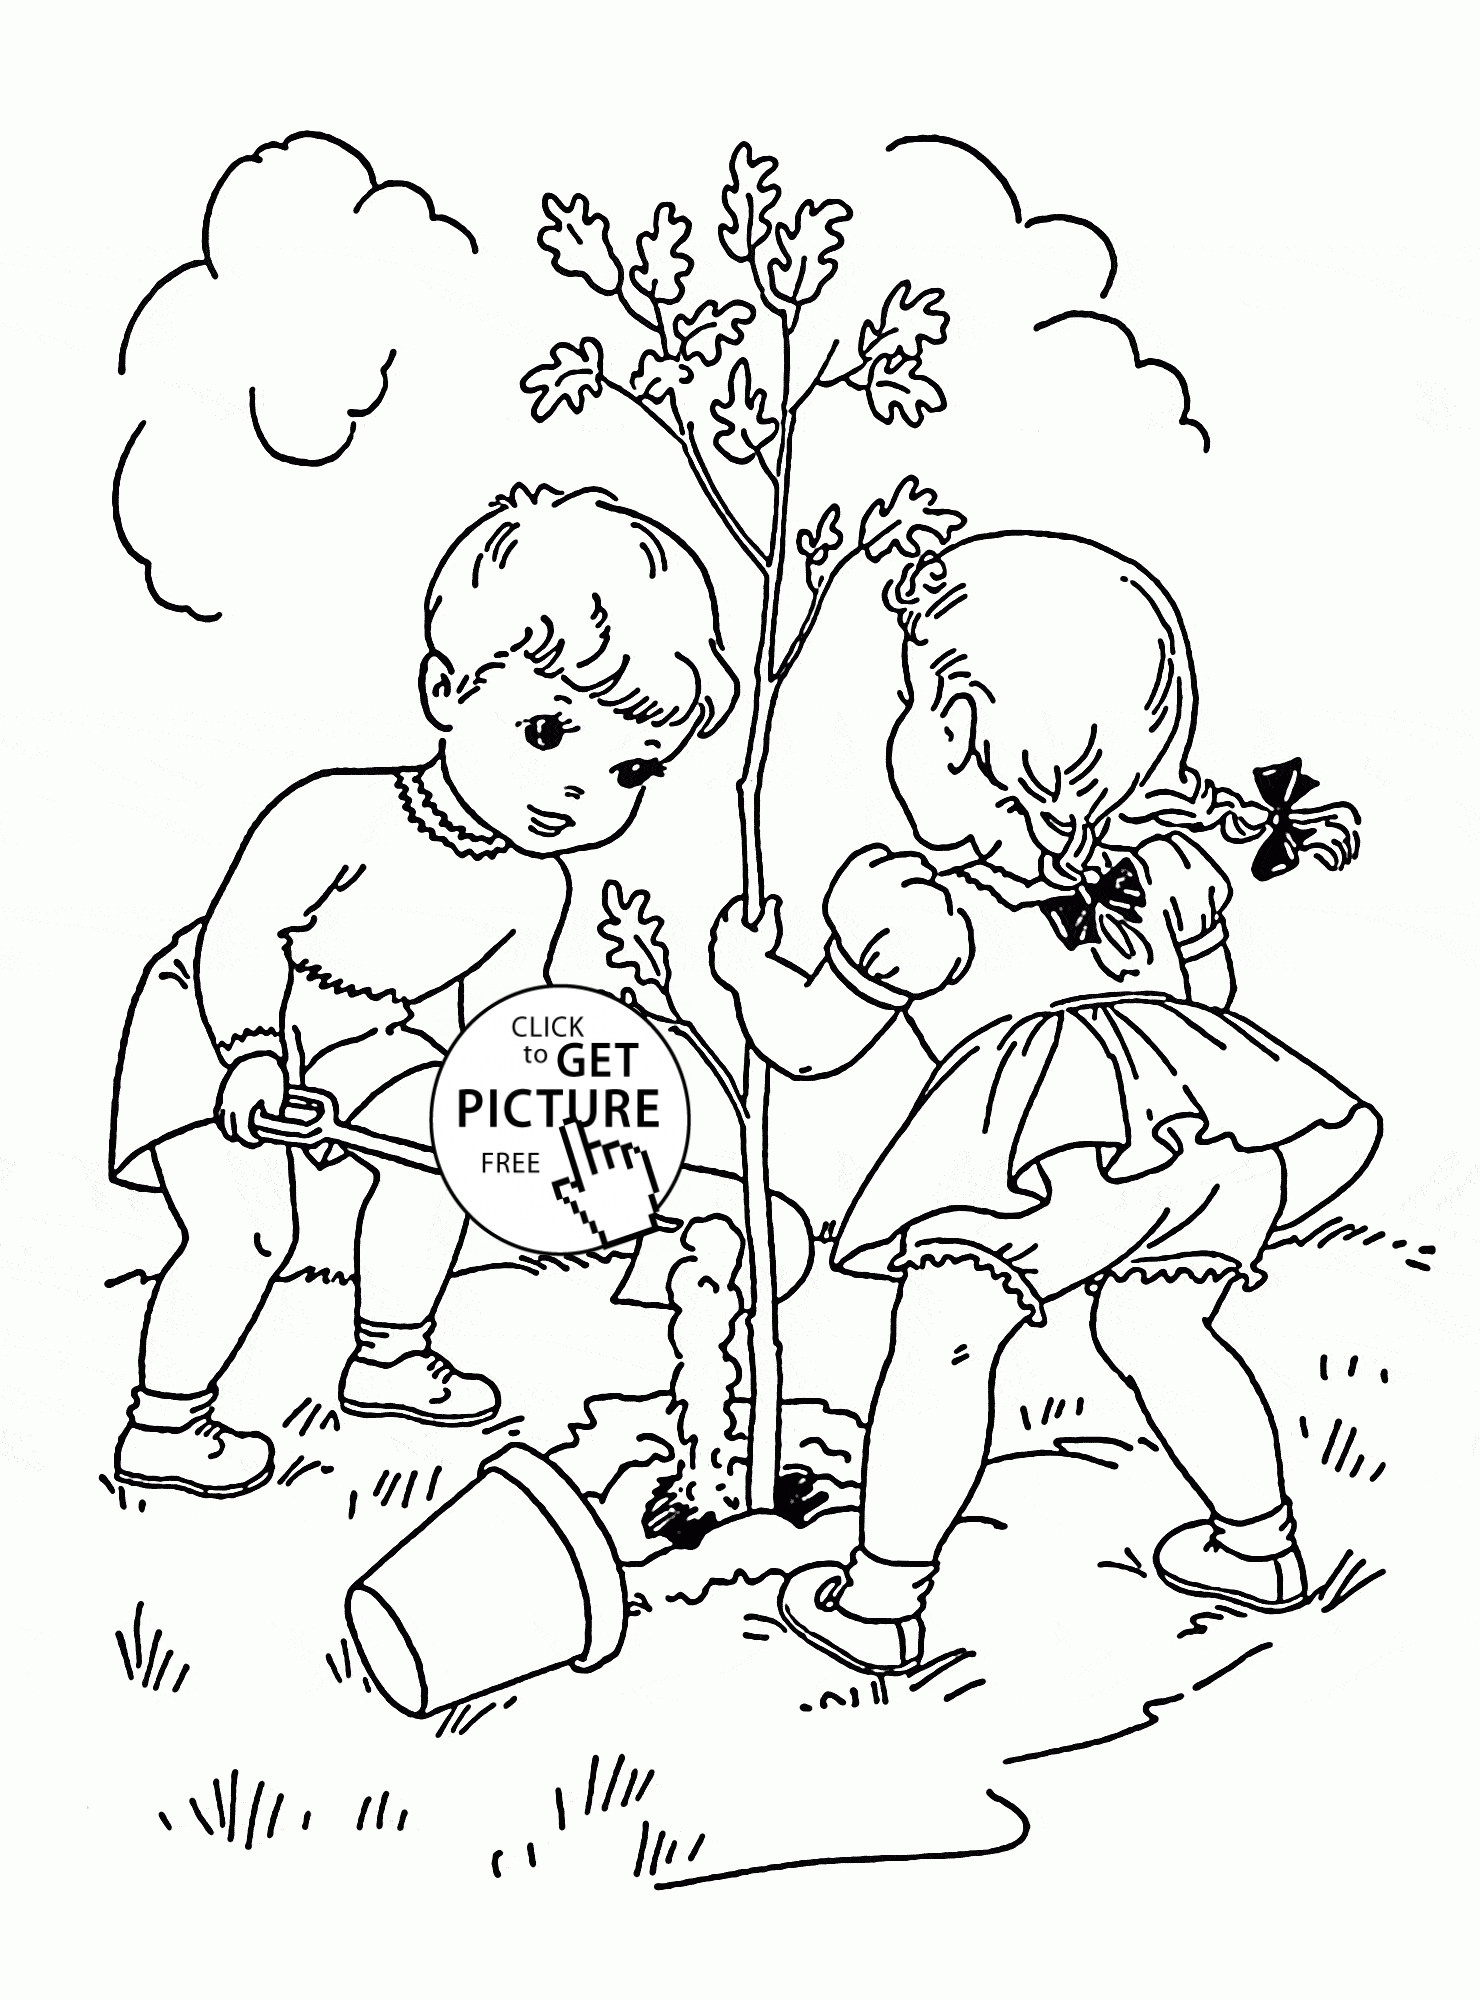 Children Plant Tree coloring page for kids, spring coloring pages ...